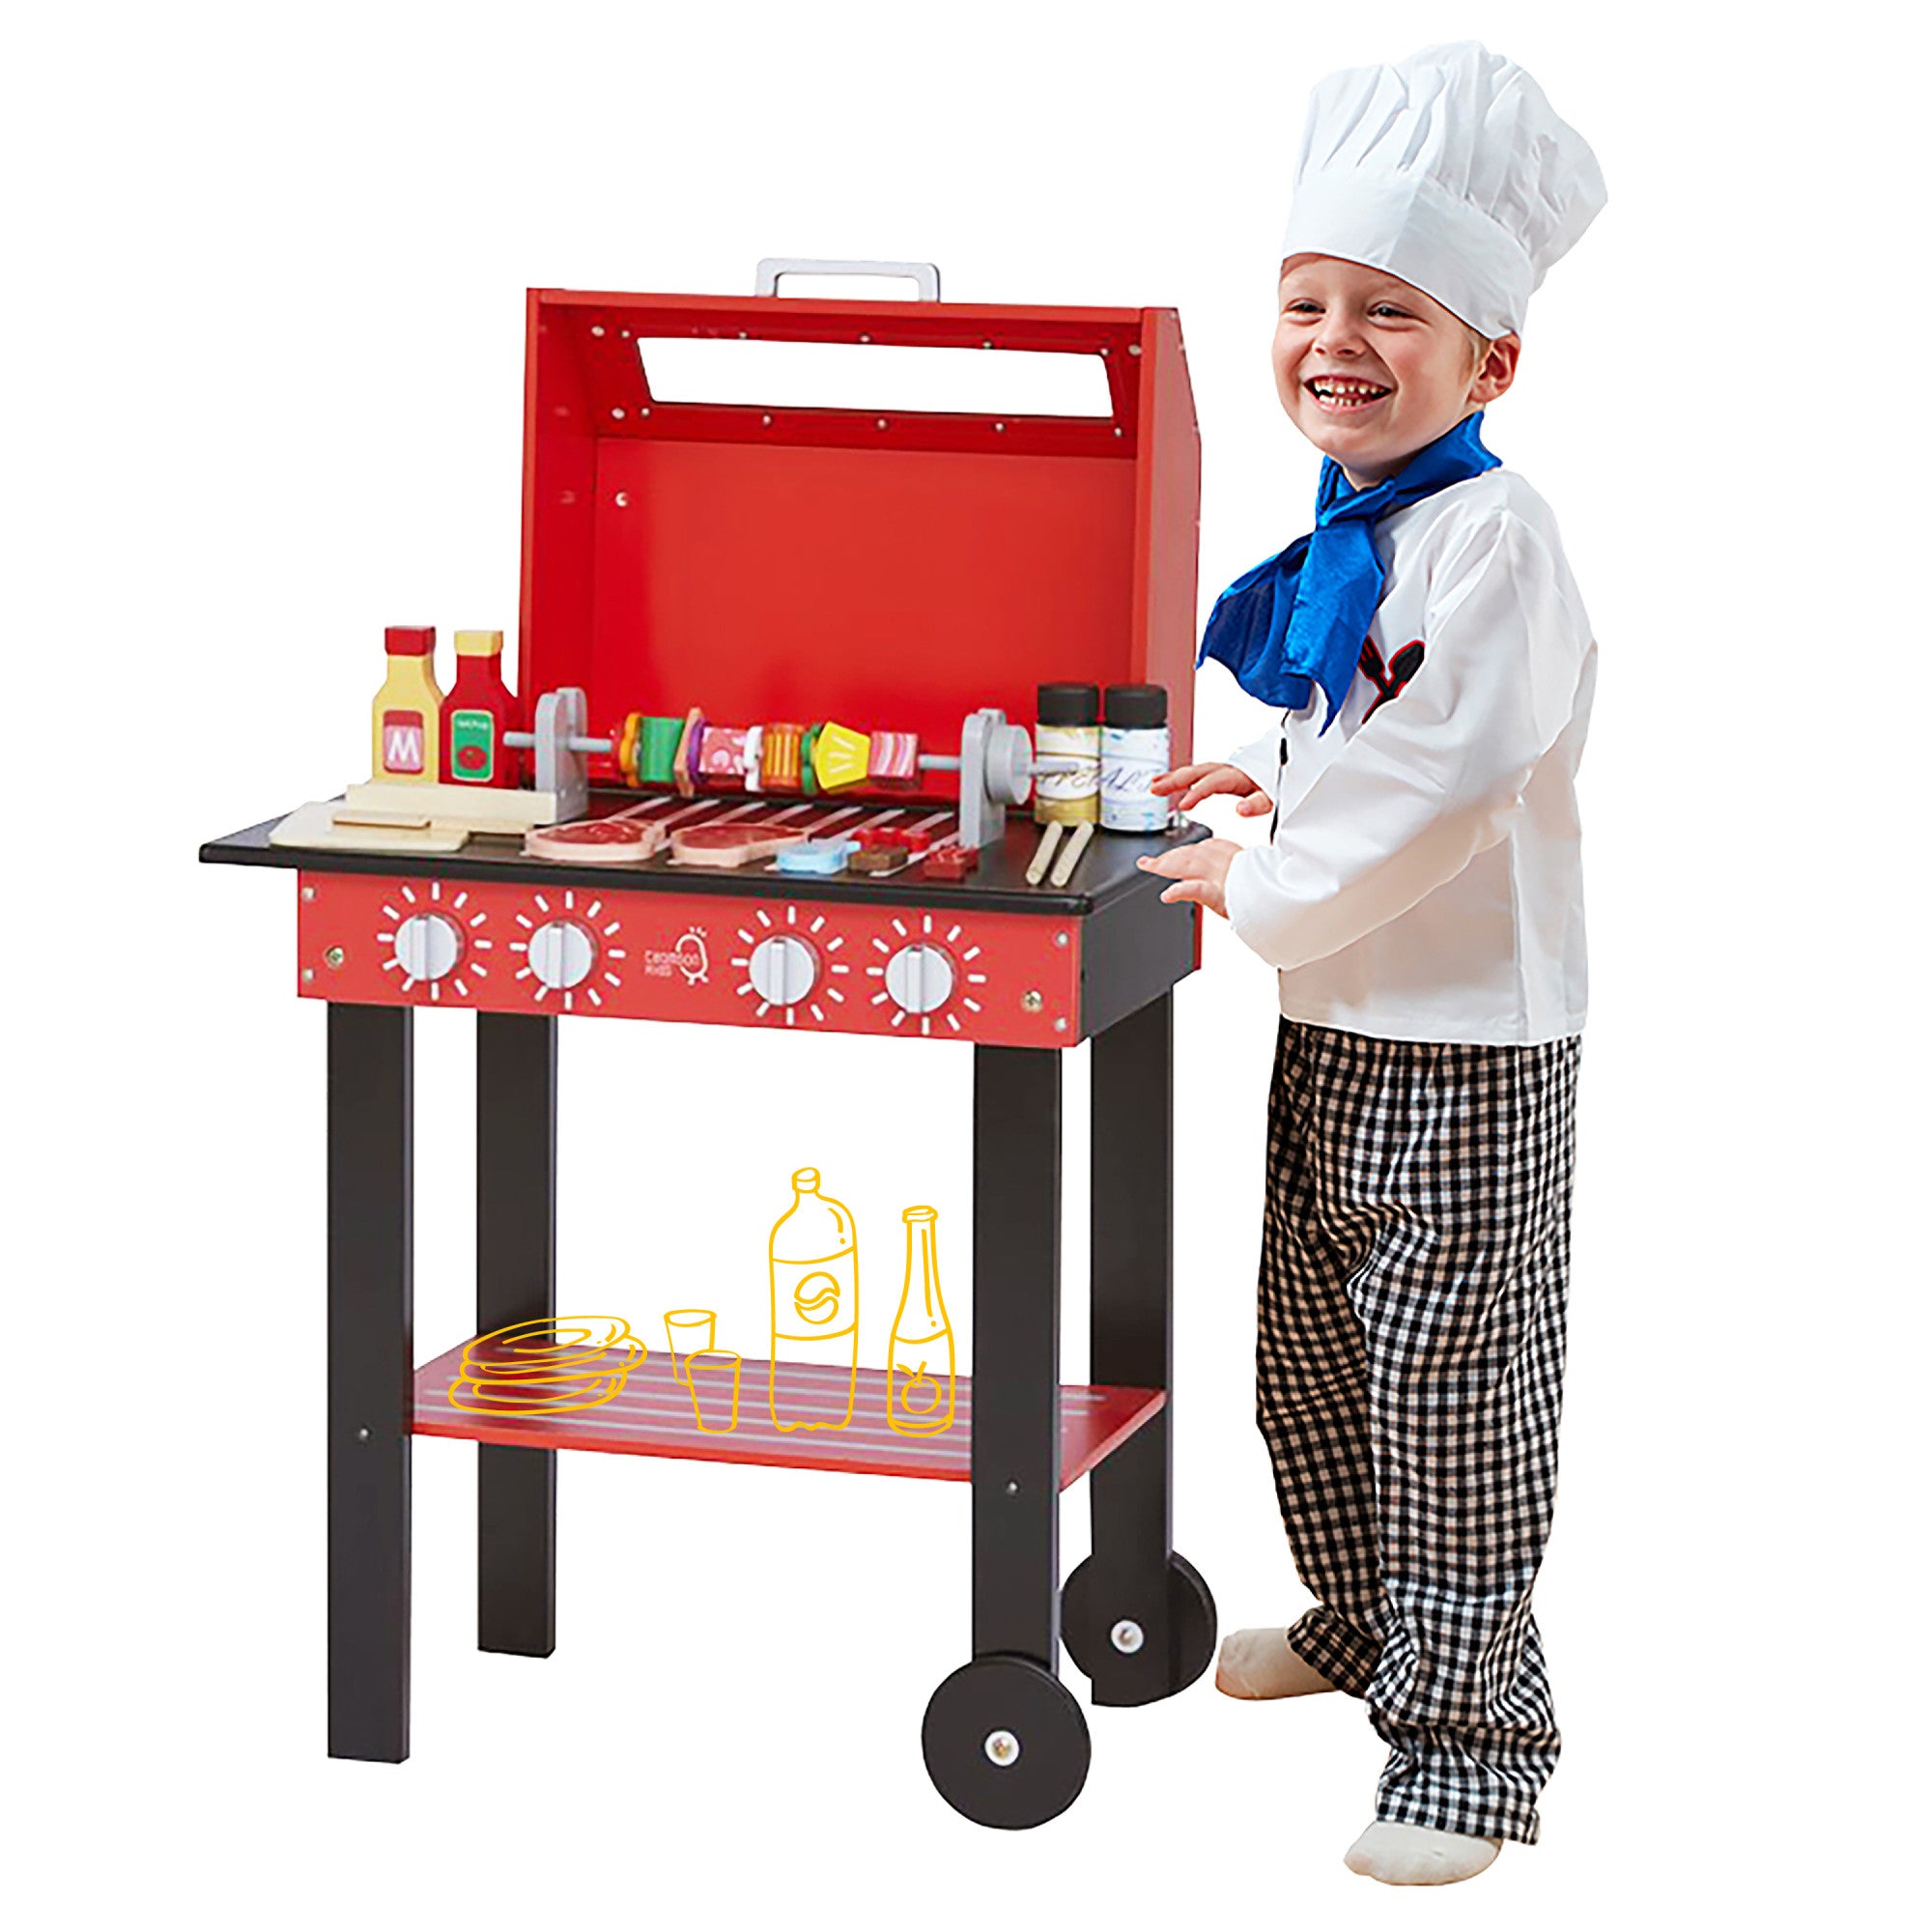 Teamson Kids Little Helper Wooden Backyard BBQ Grill Playset with 26 Cooking Accessories, Red/Black